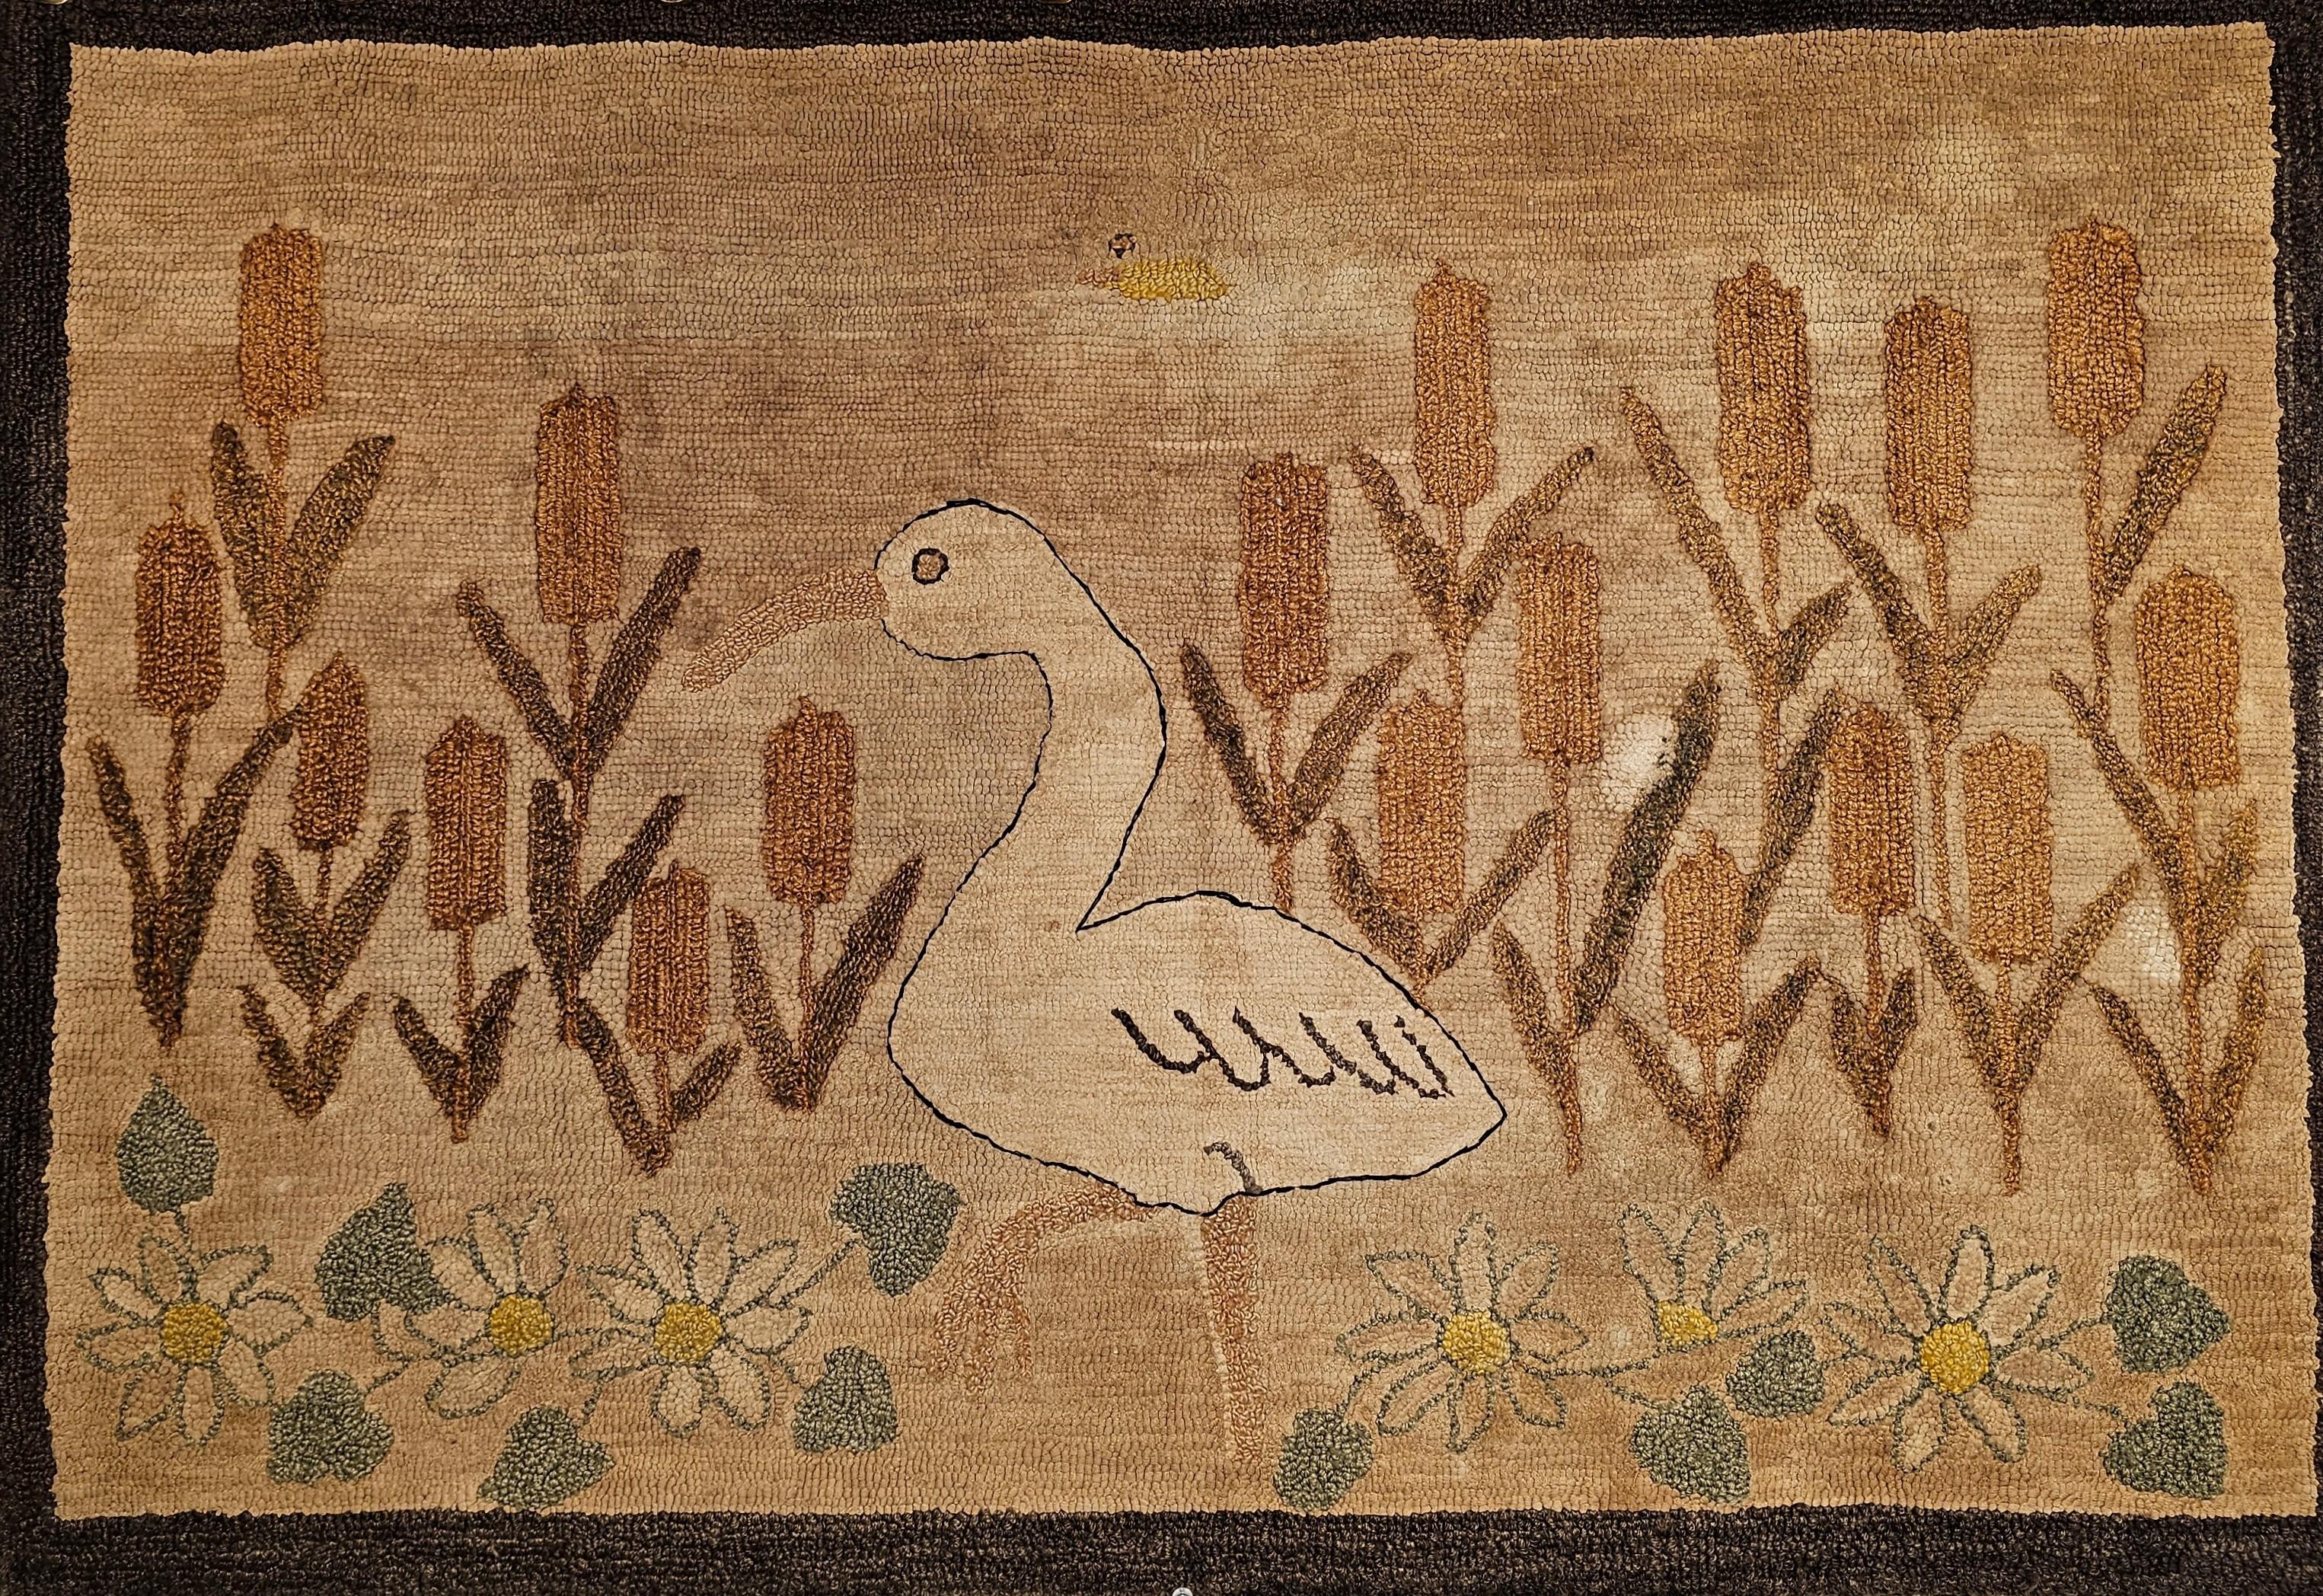 Early 20th Century hand hooked rug in a wonderful bird and flowers design in earth tone color pattern.  The rug has one of the most delightful designs we have seen in vintage American hand hooked rugs.  We are intrigued with the novelty and the